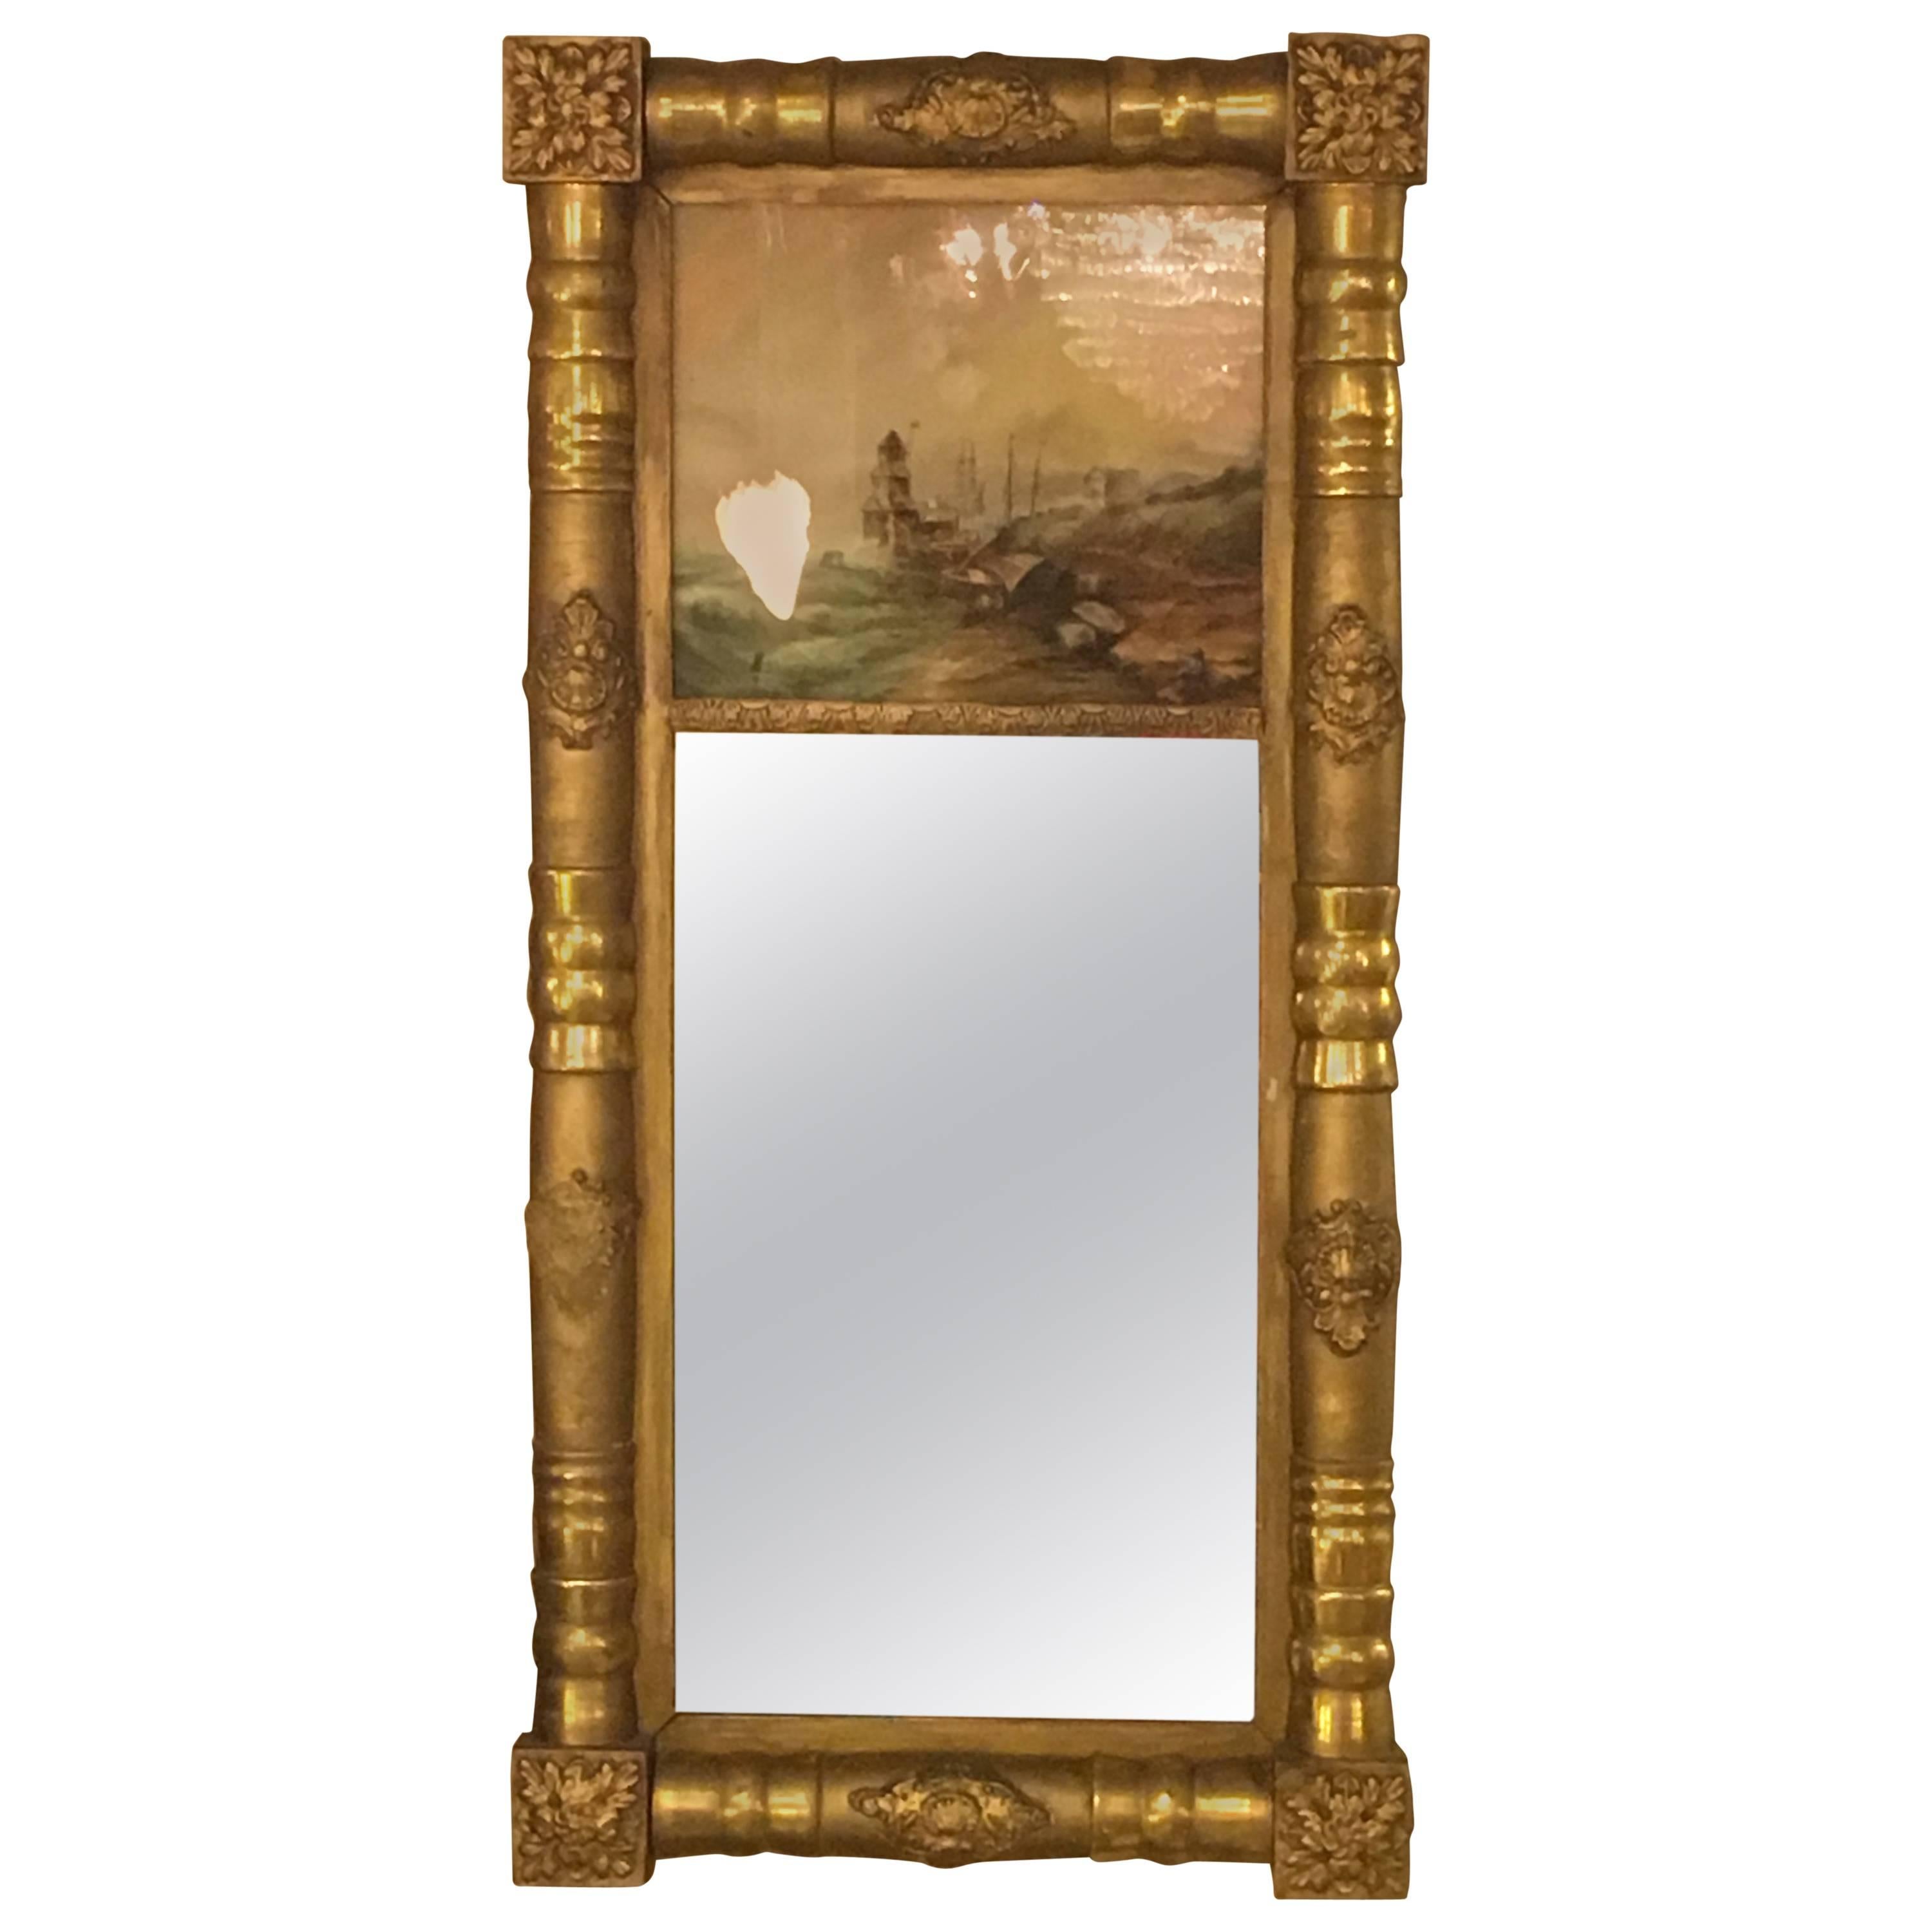 19th-20th Century Federal Style Crest Mirror For Sale